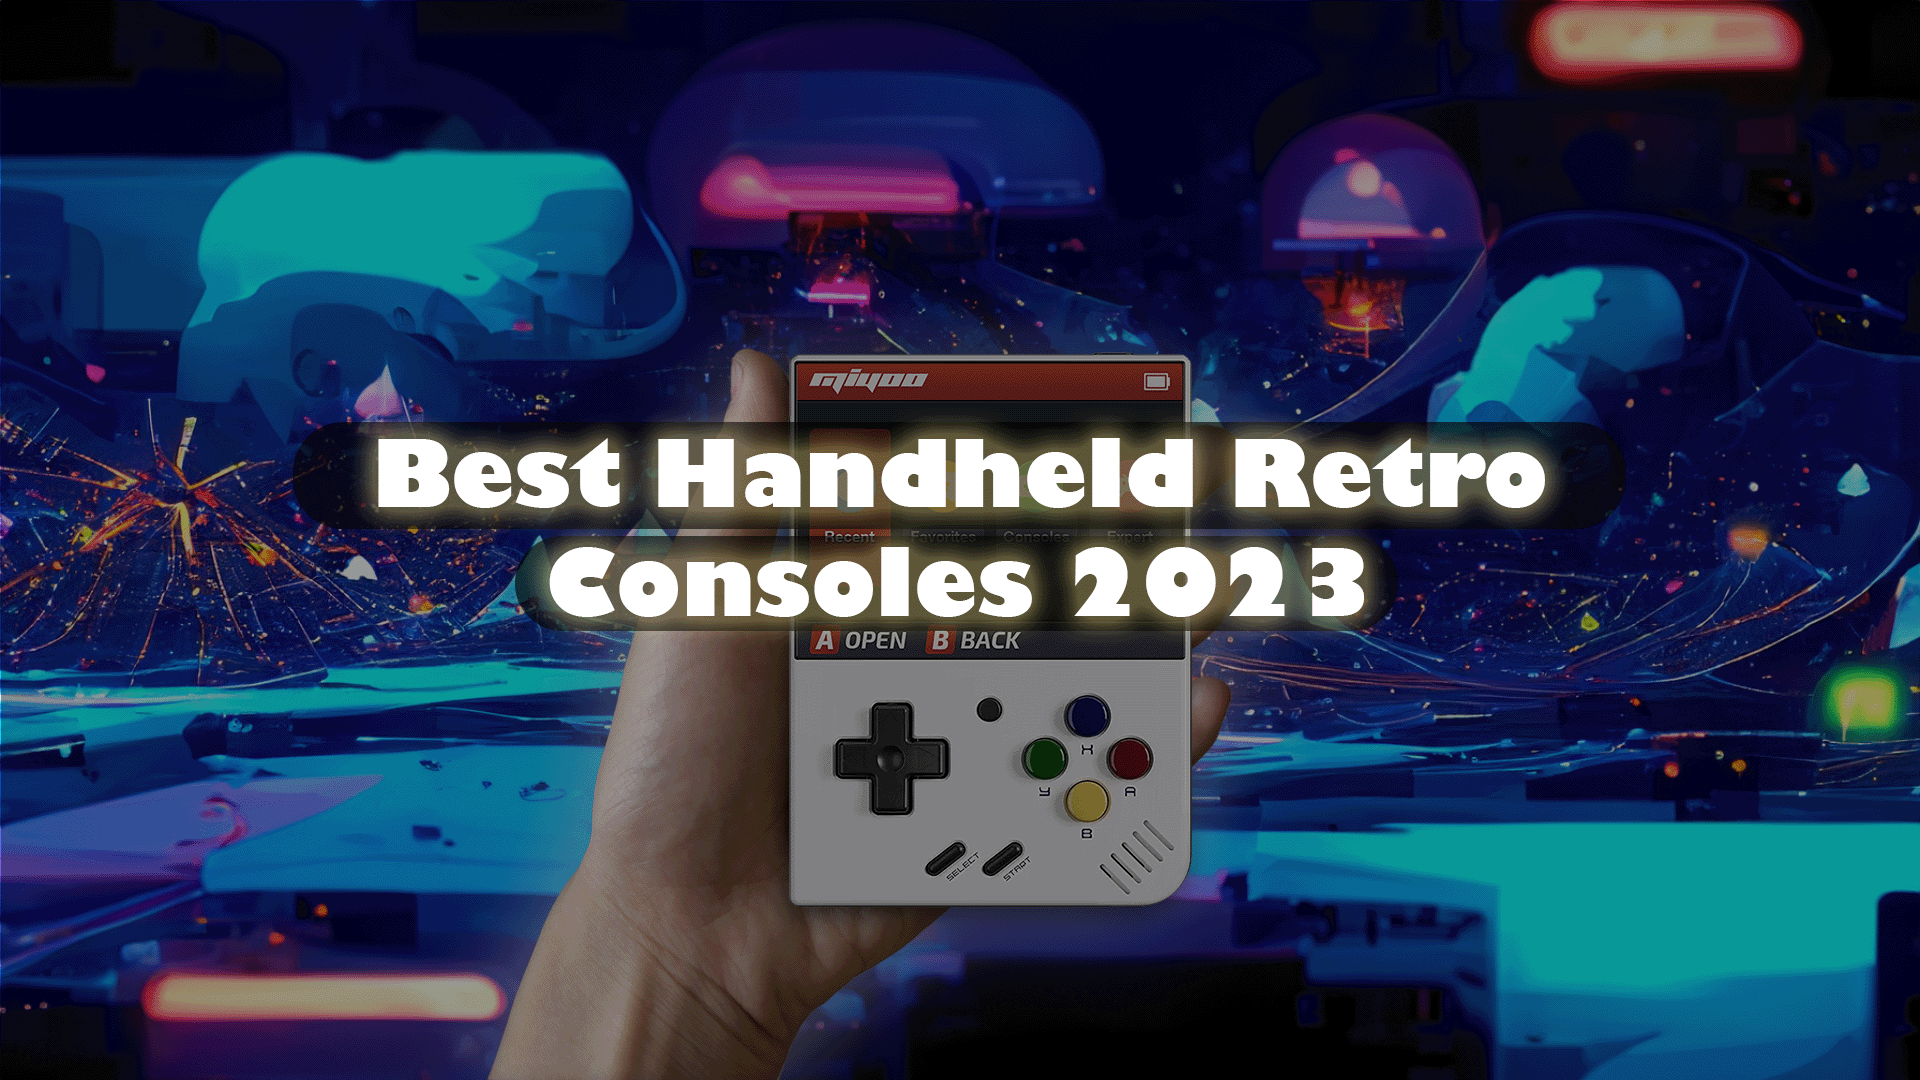 The Best Handheld Retro Console in 2023